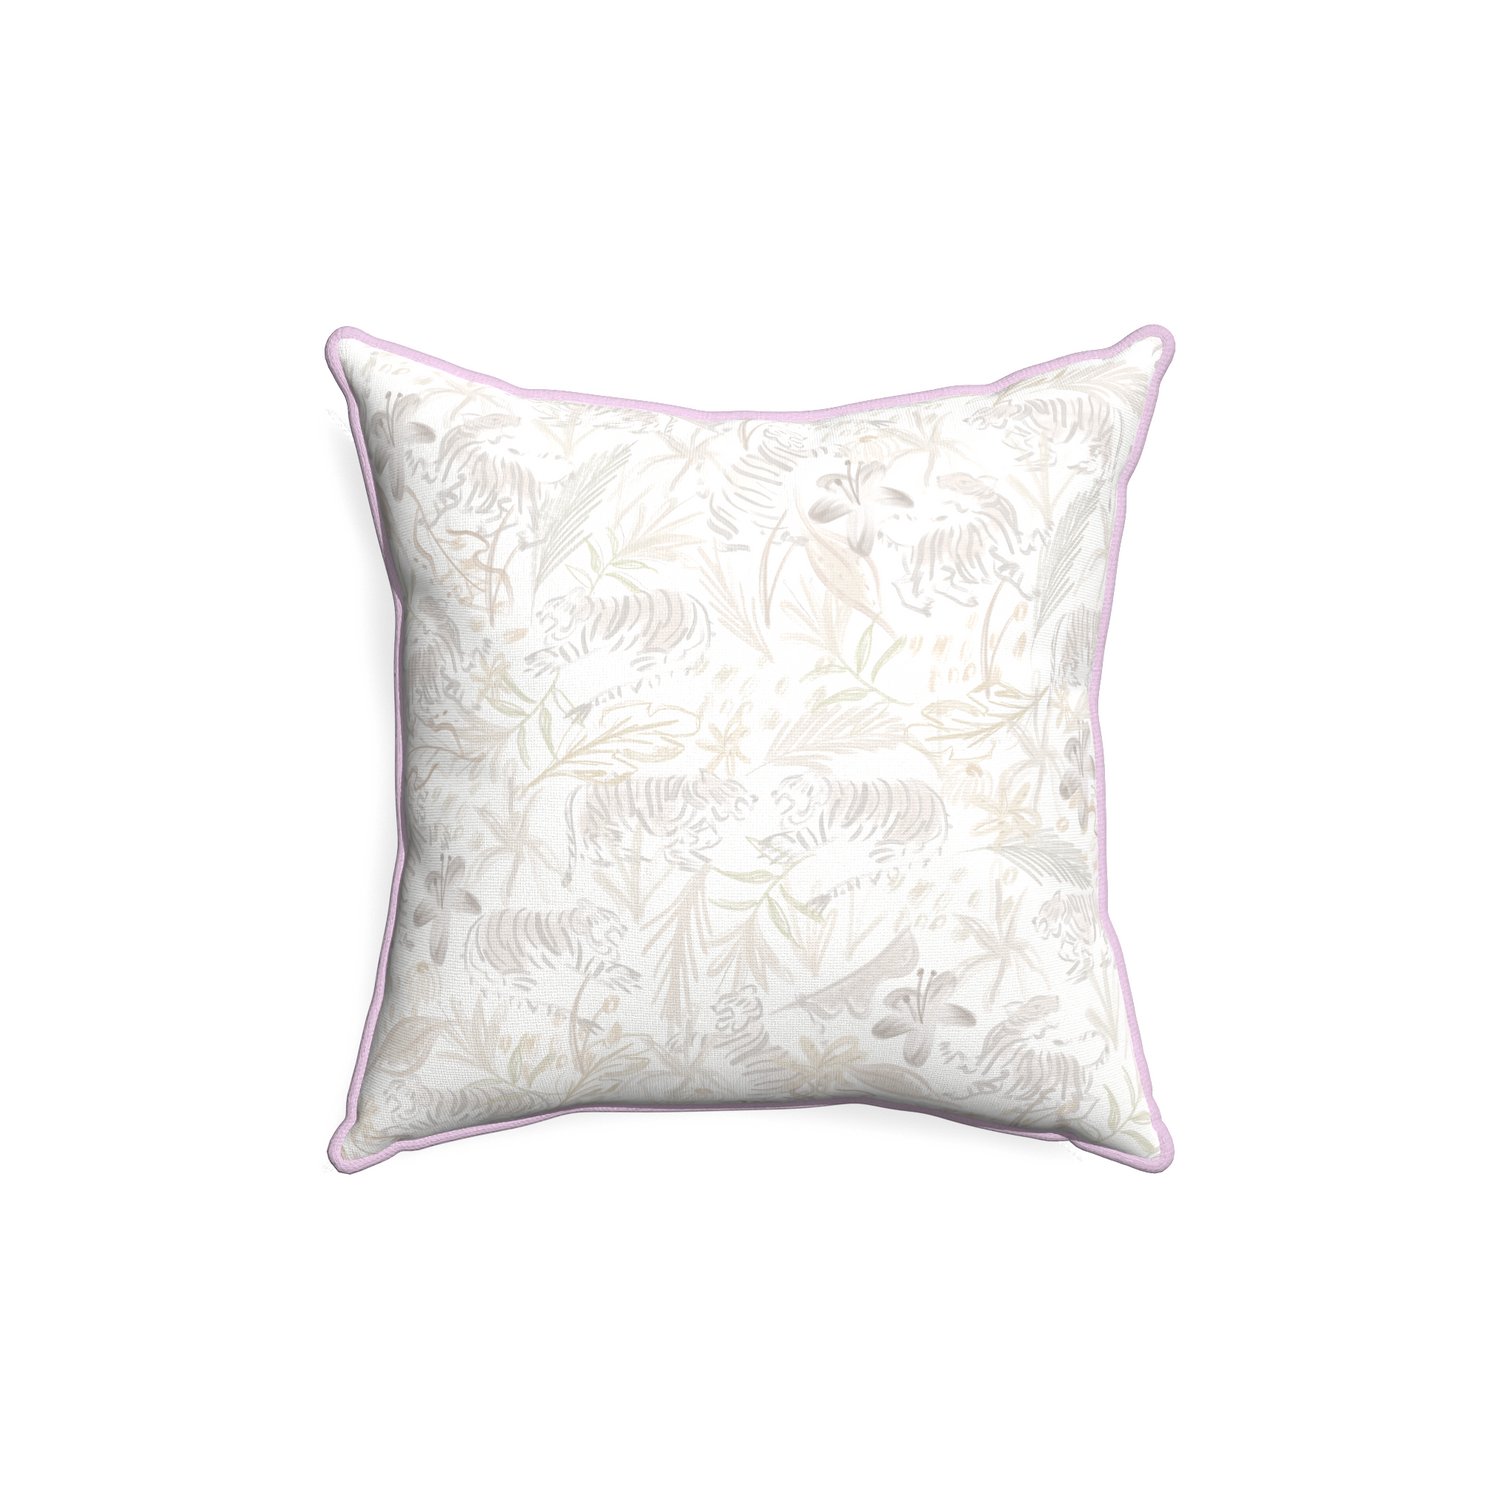 18-square frida sand custom beige chinoiserie tigerpillow with l piping on white background